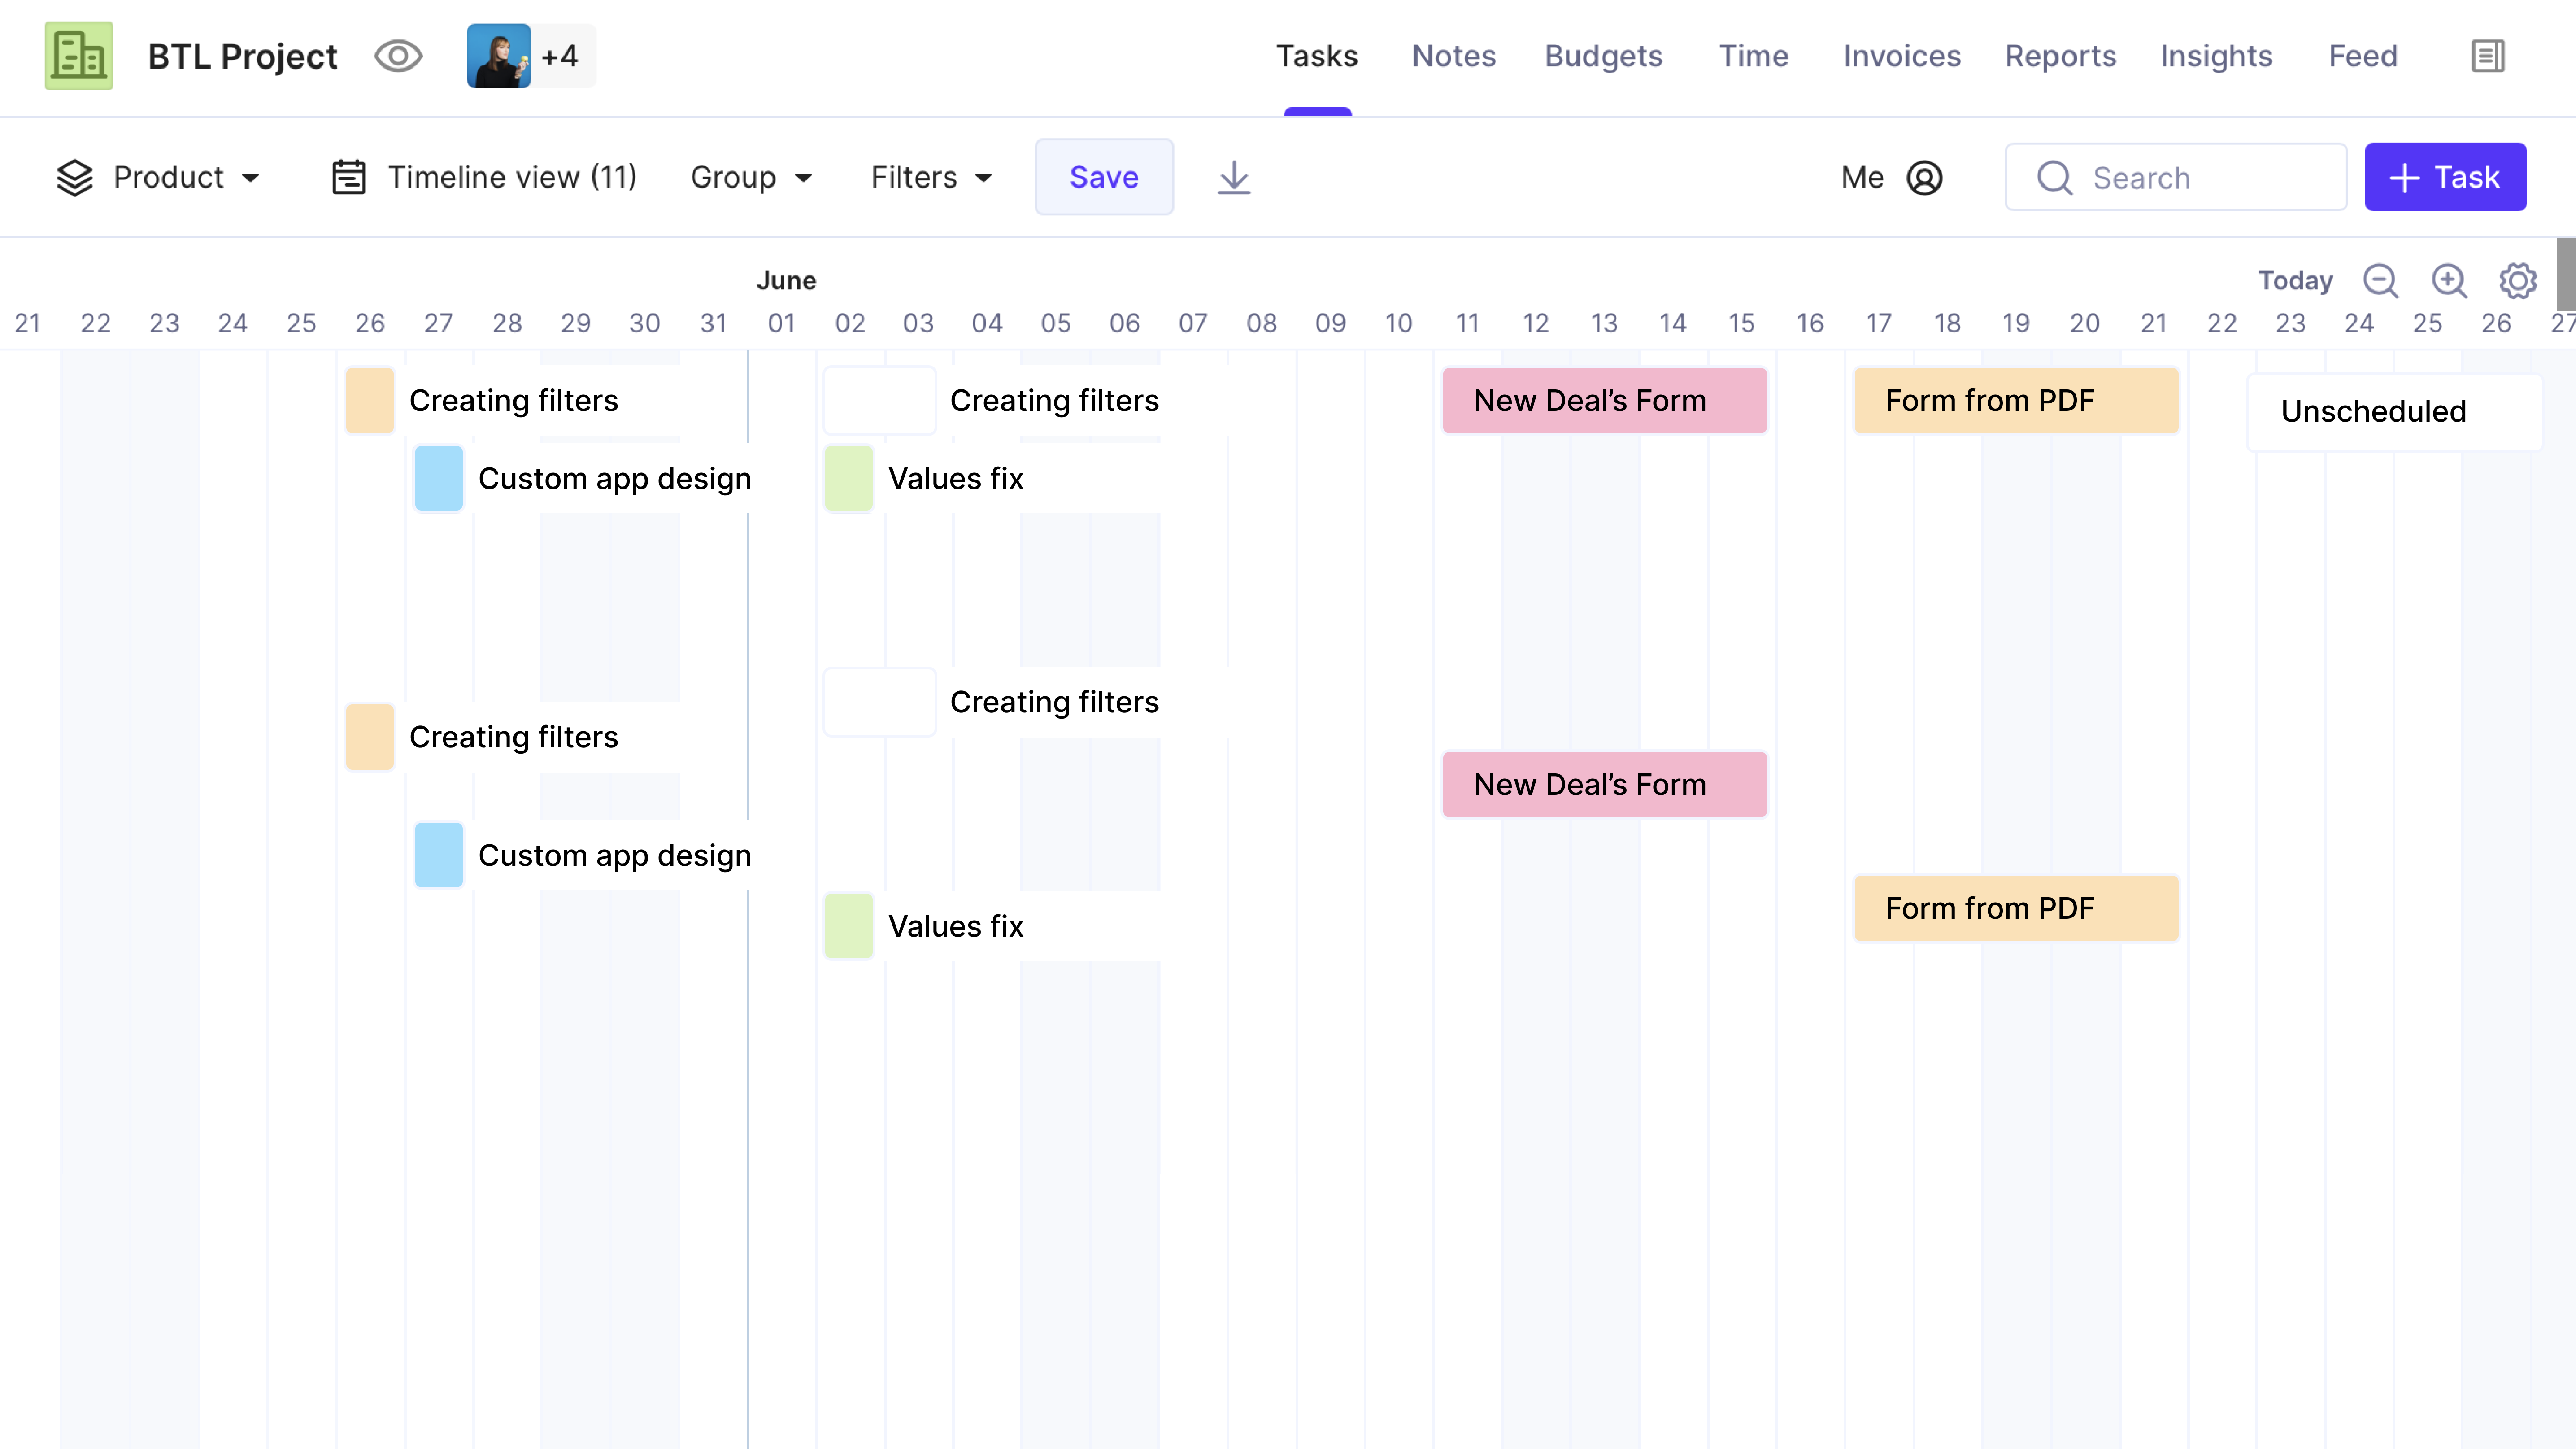 Productive Software - View your scheduled items in a timeline. Collaborate with teammates on tasks in real-time, streamline best practices, and let clients in on progress.